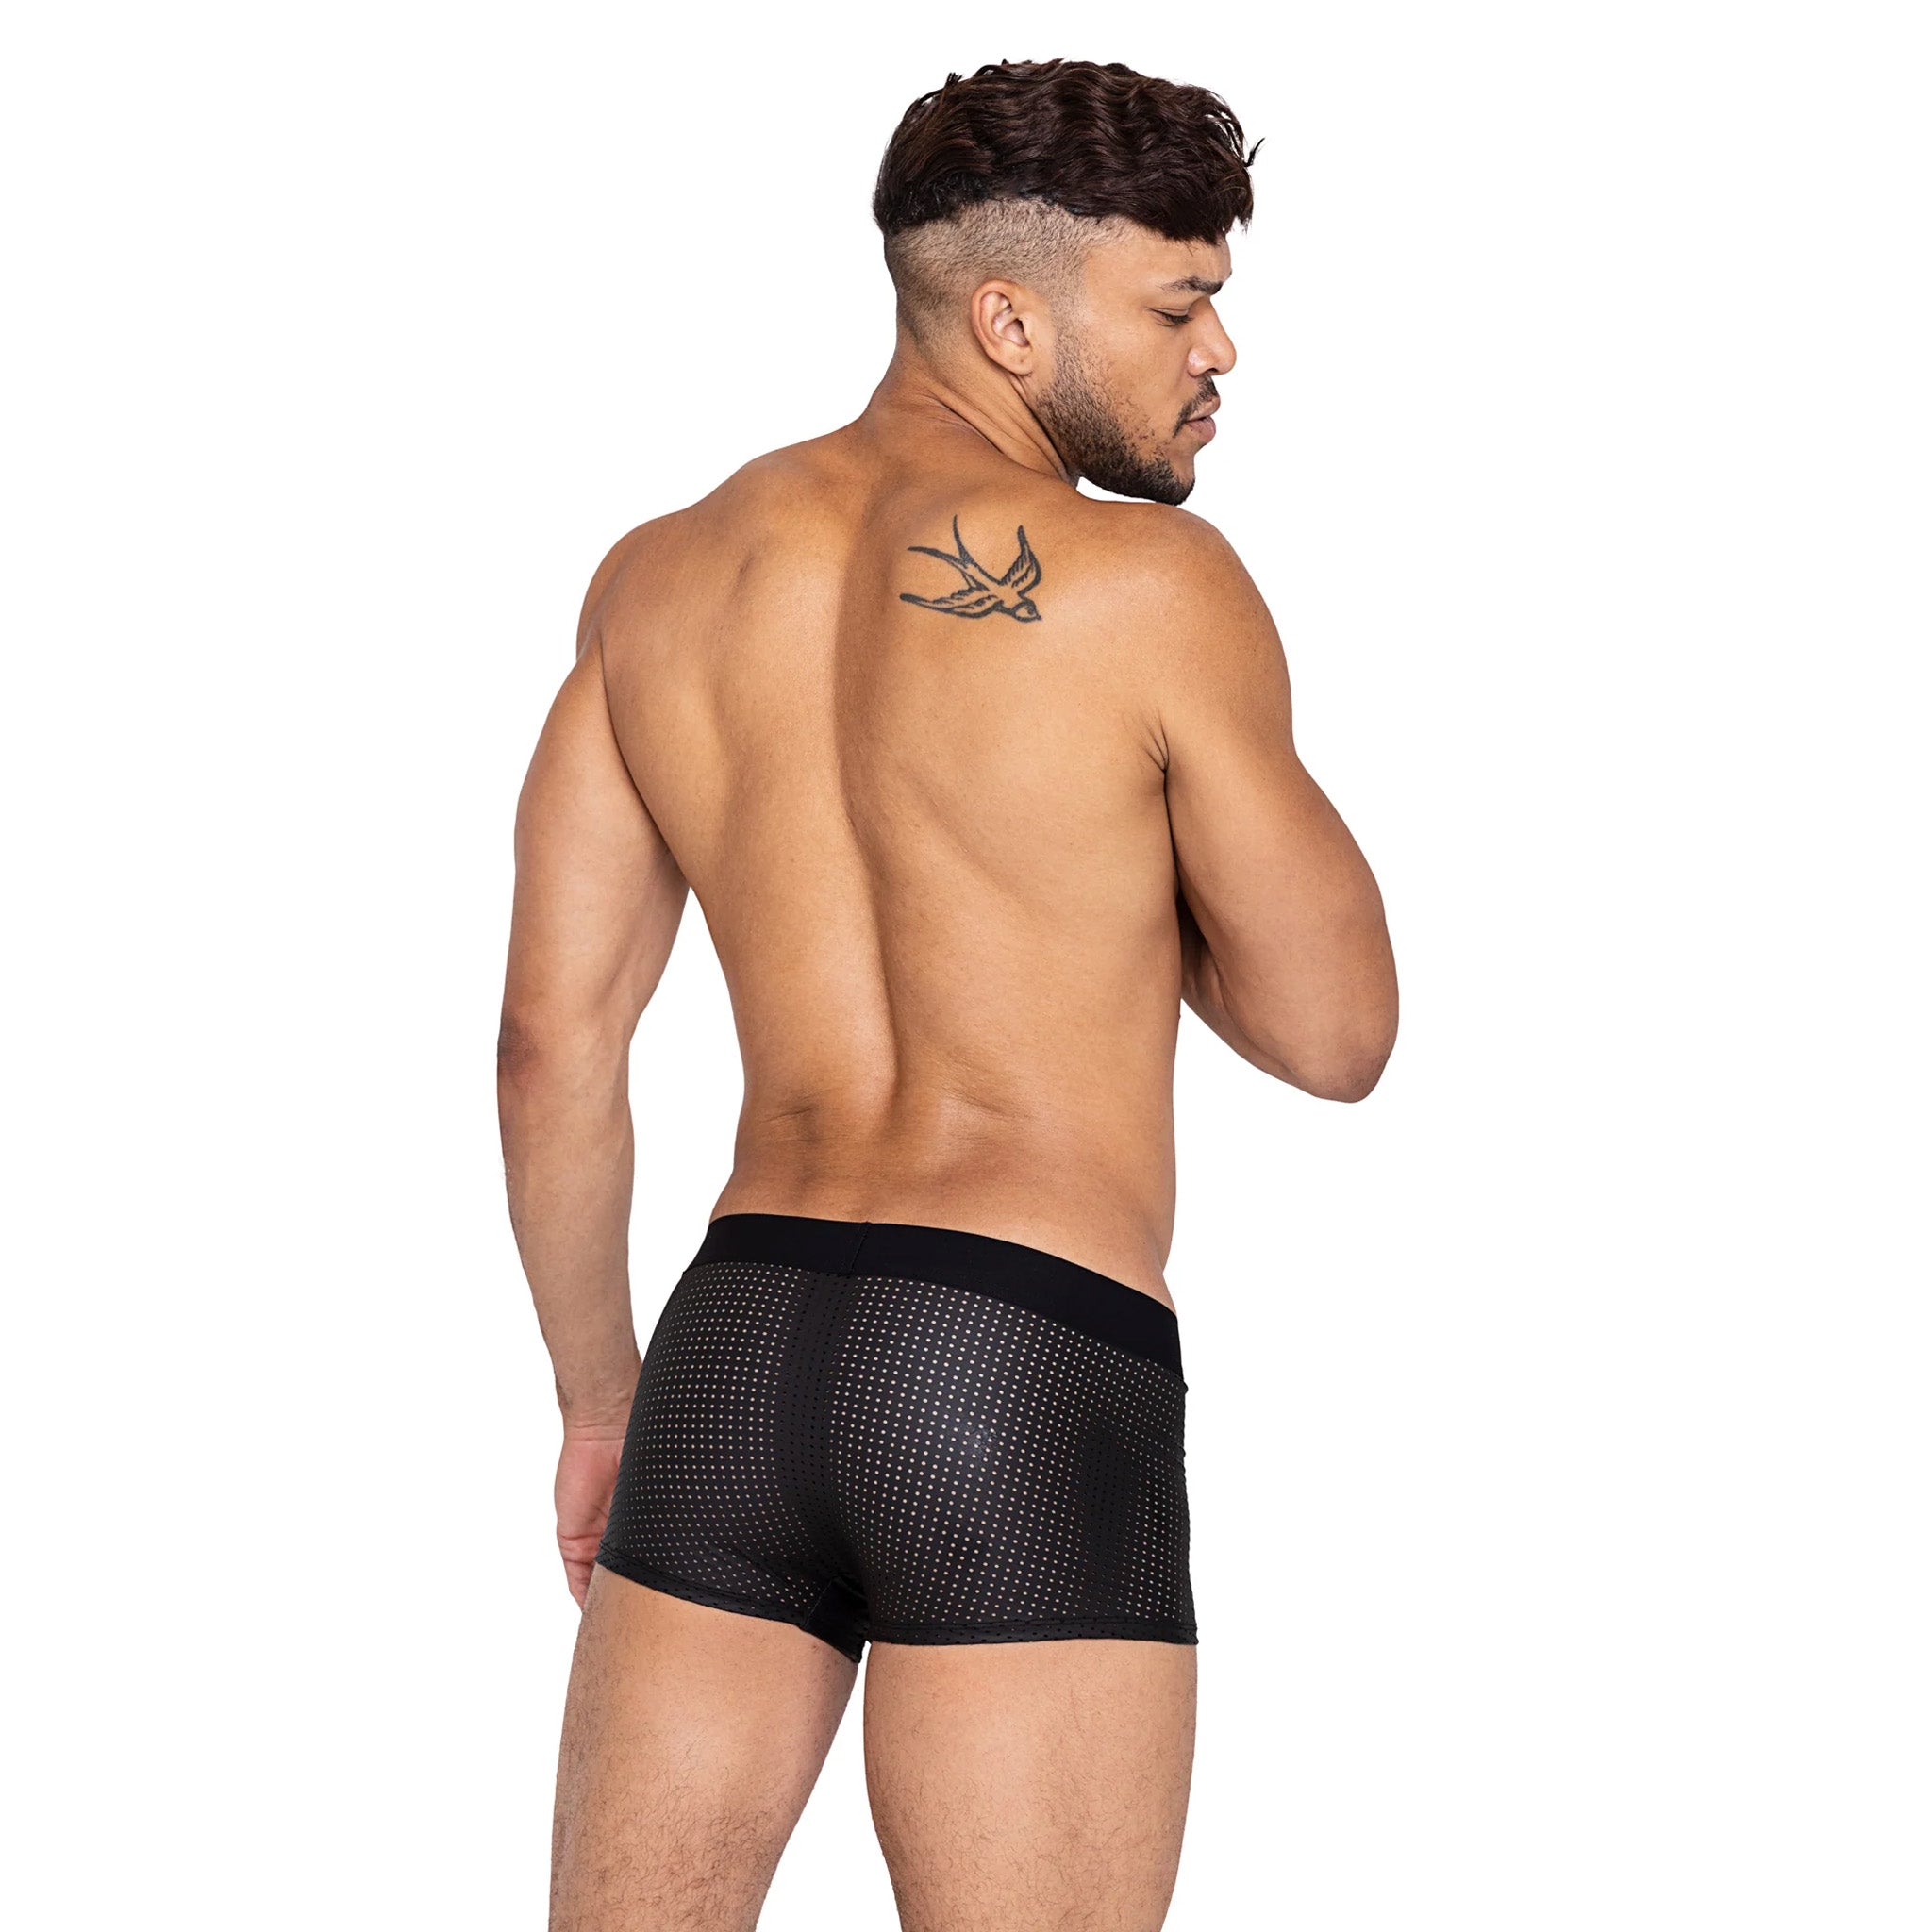 Perforated Contoured Pouch Short Briefs